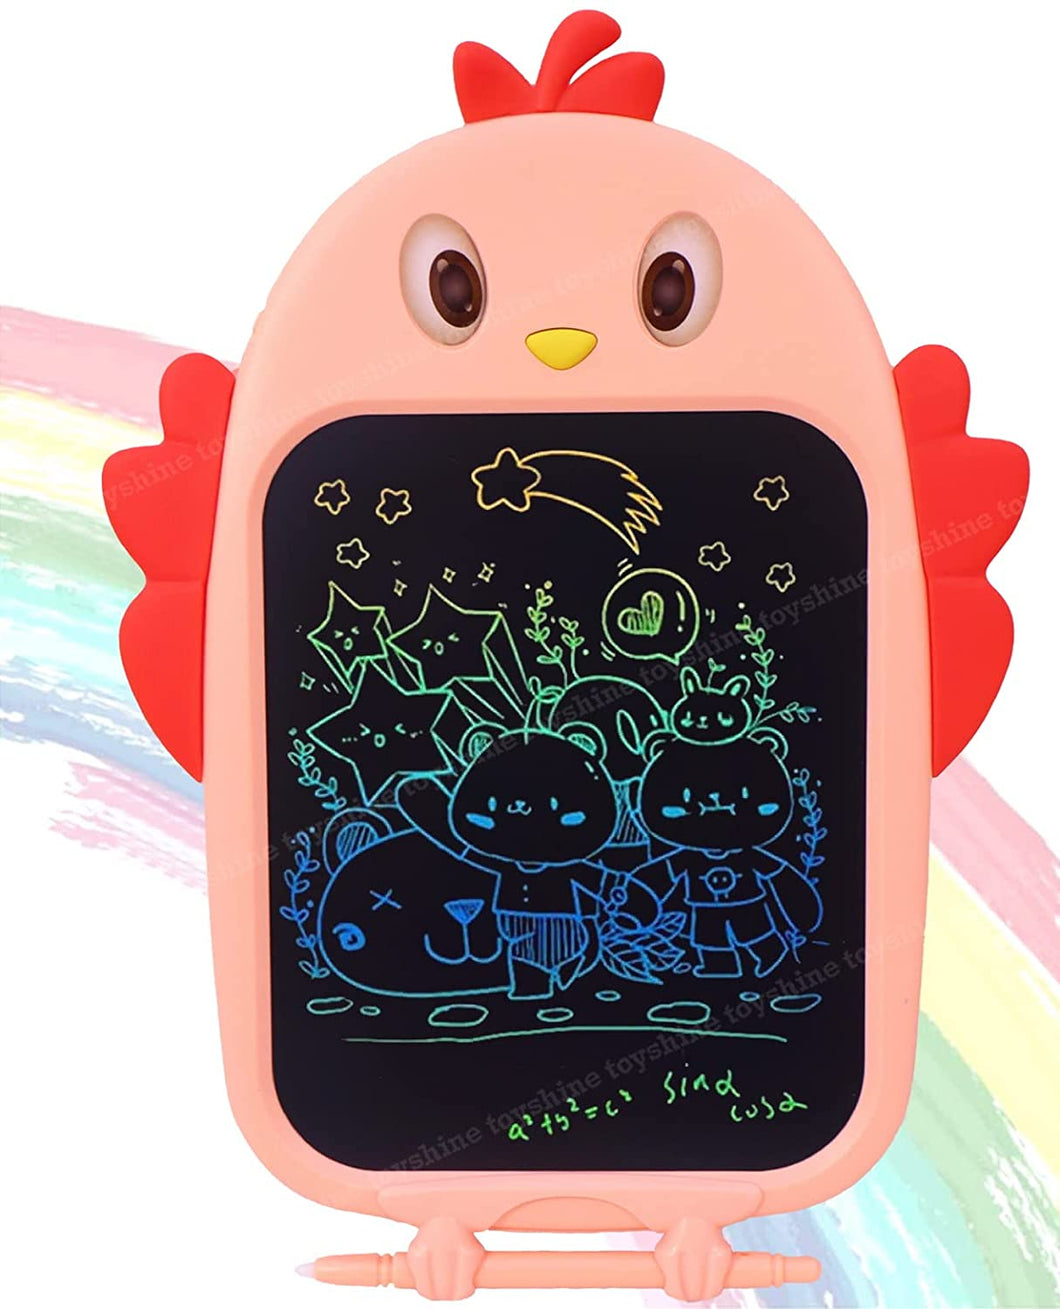 Toyshine Writing Tablet 8.5 Inch Colorful Screen Doodle Board for Ages 3+ Kids Toys, Electronic Drawing Board Kids Doodle Pad Educational and Learning Toys Girls Boys Gifts Pink M2